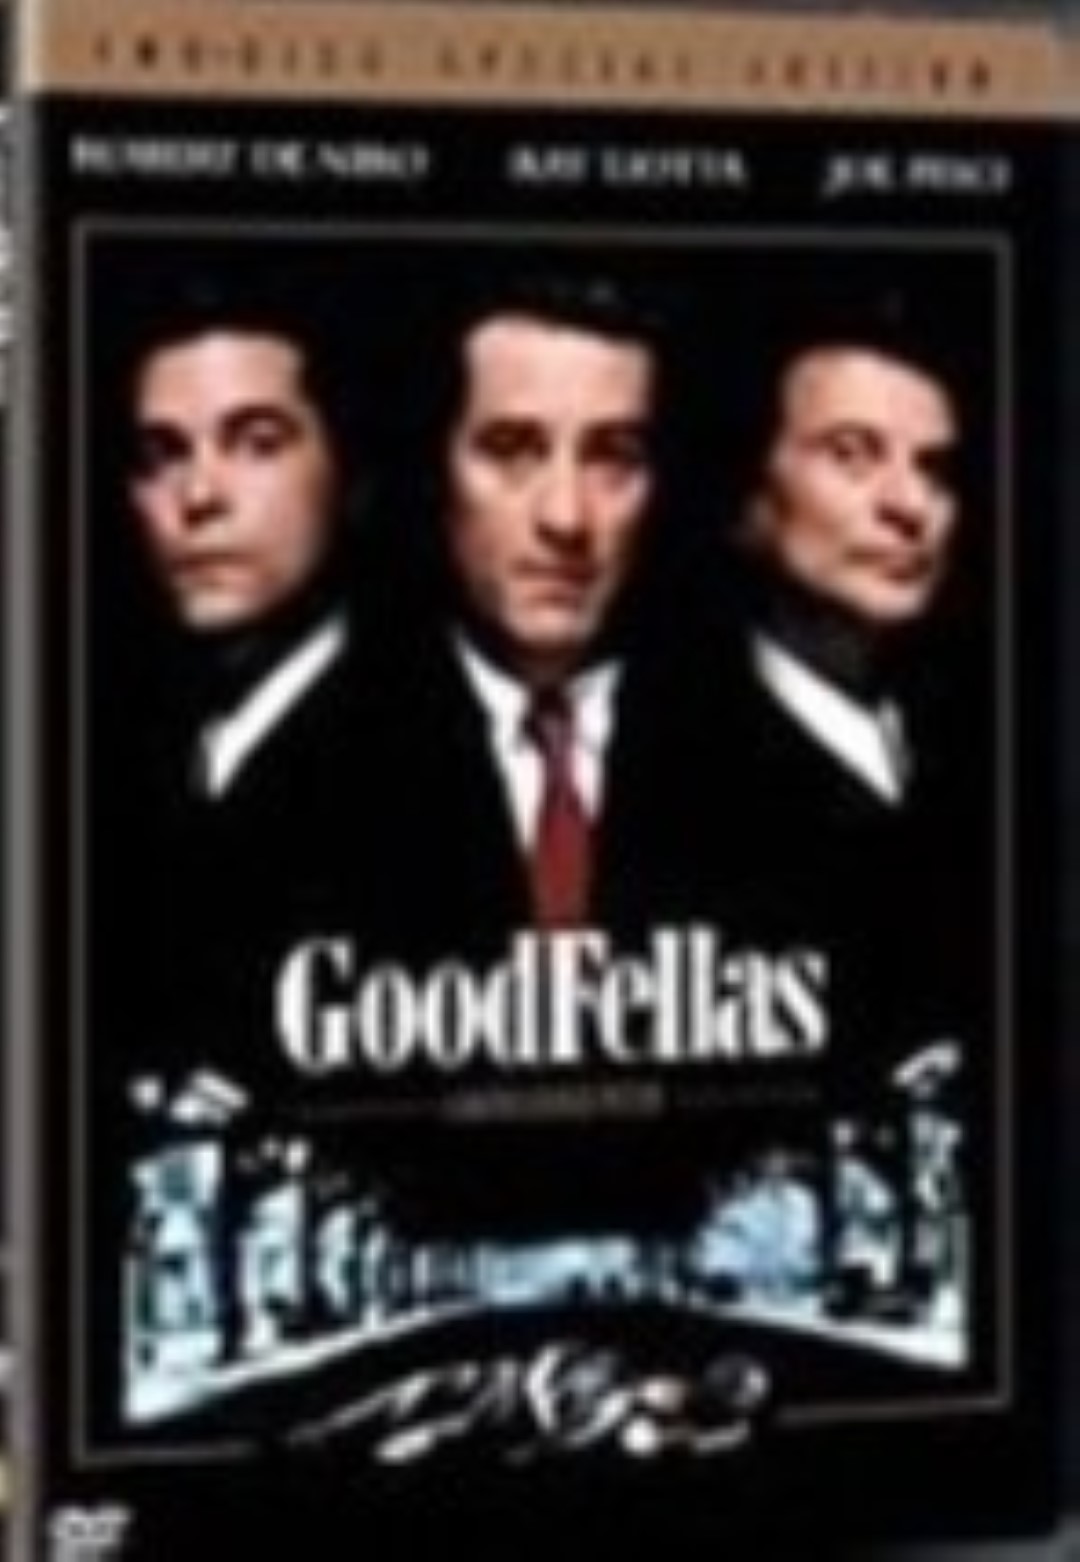 Goodfellas  two disc special edition  dvd  large 